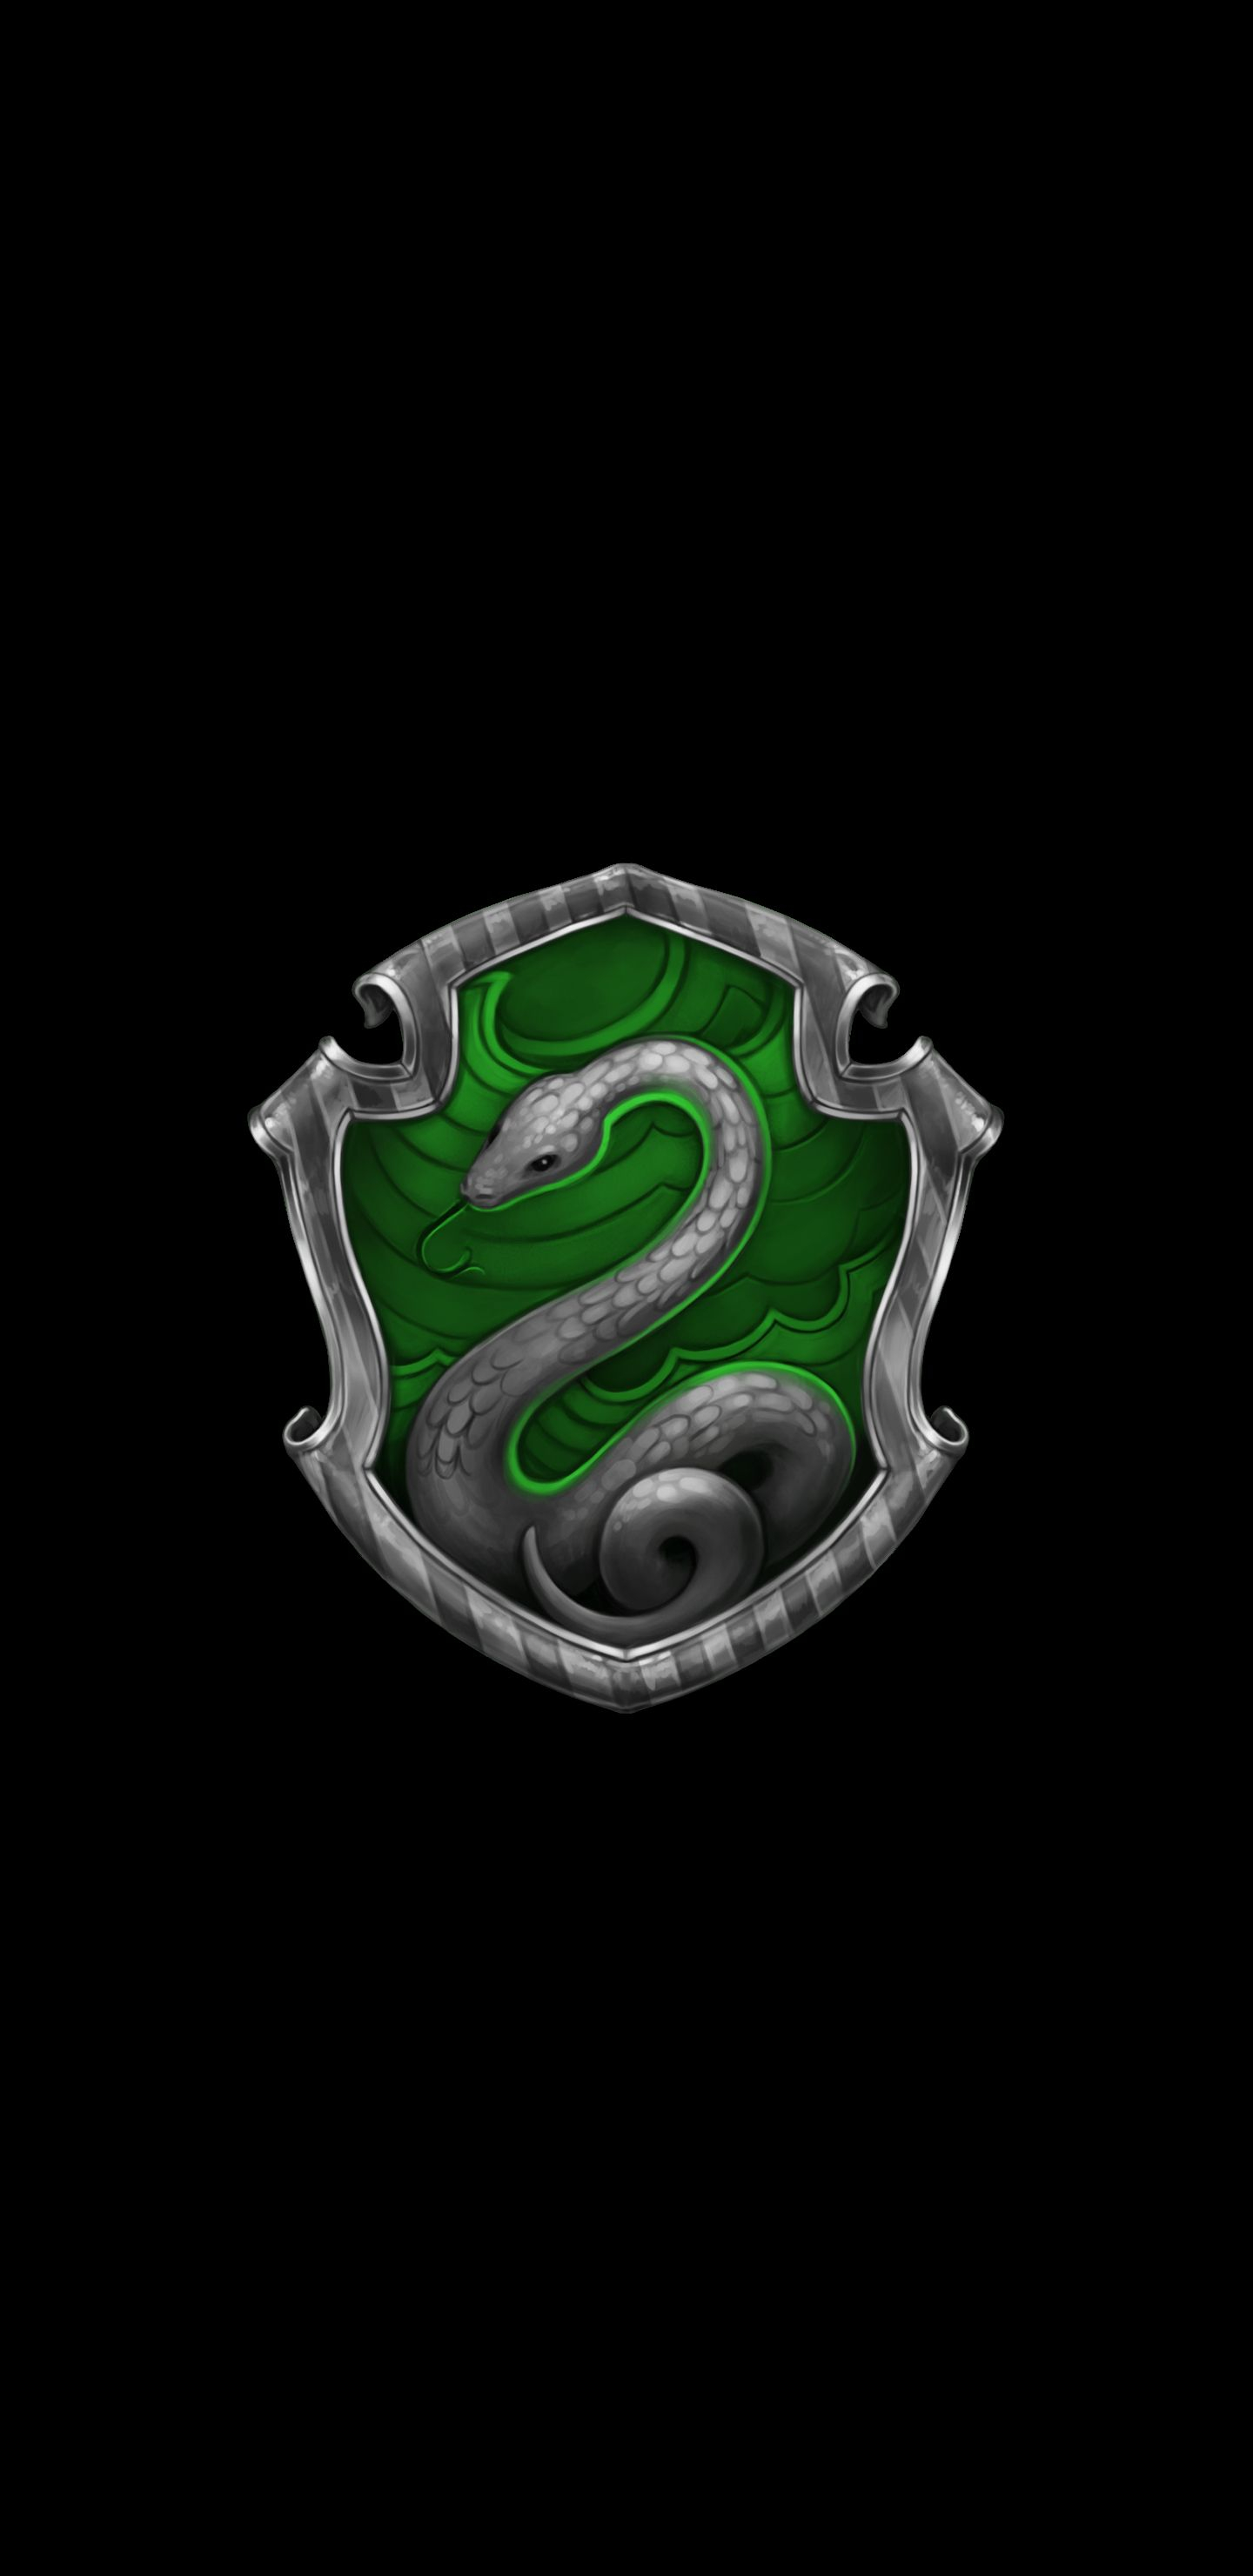 1440x2960 Slytherin Phone Wallpapers Top Free Slytherin Phone Backgrounds